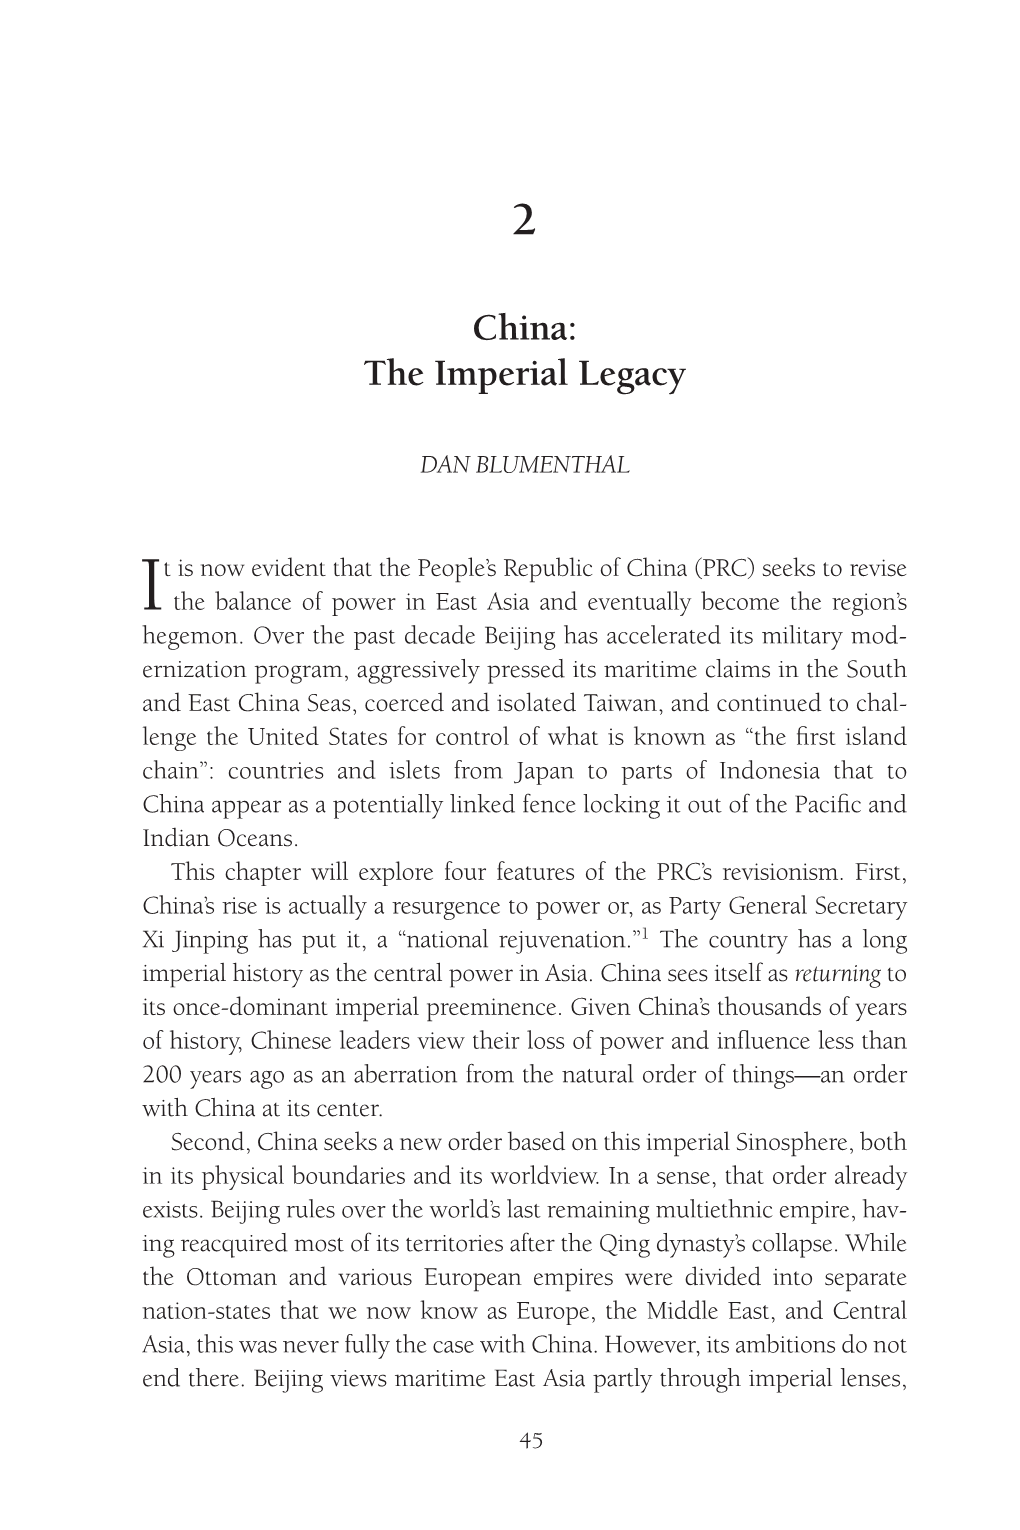 China: the Imperial Legacy